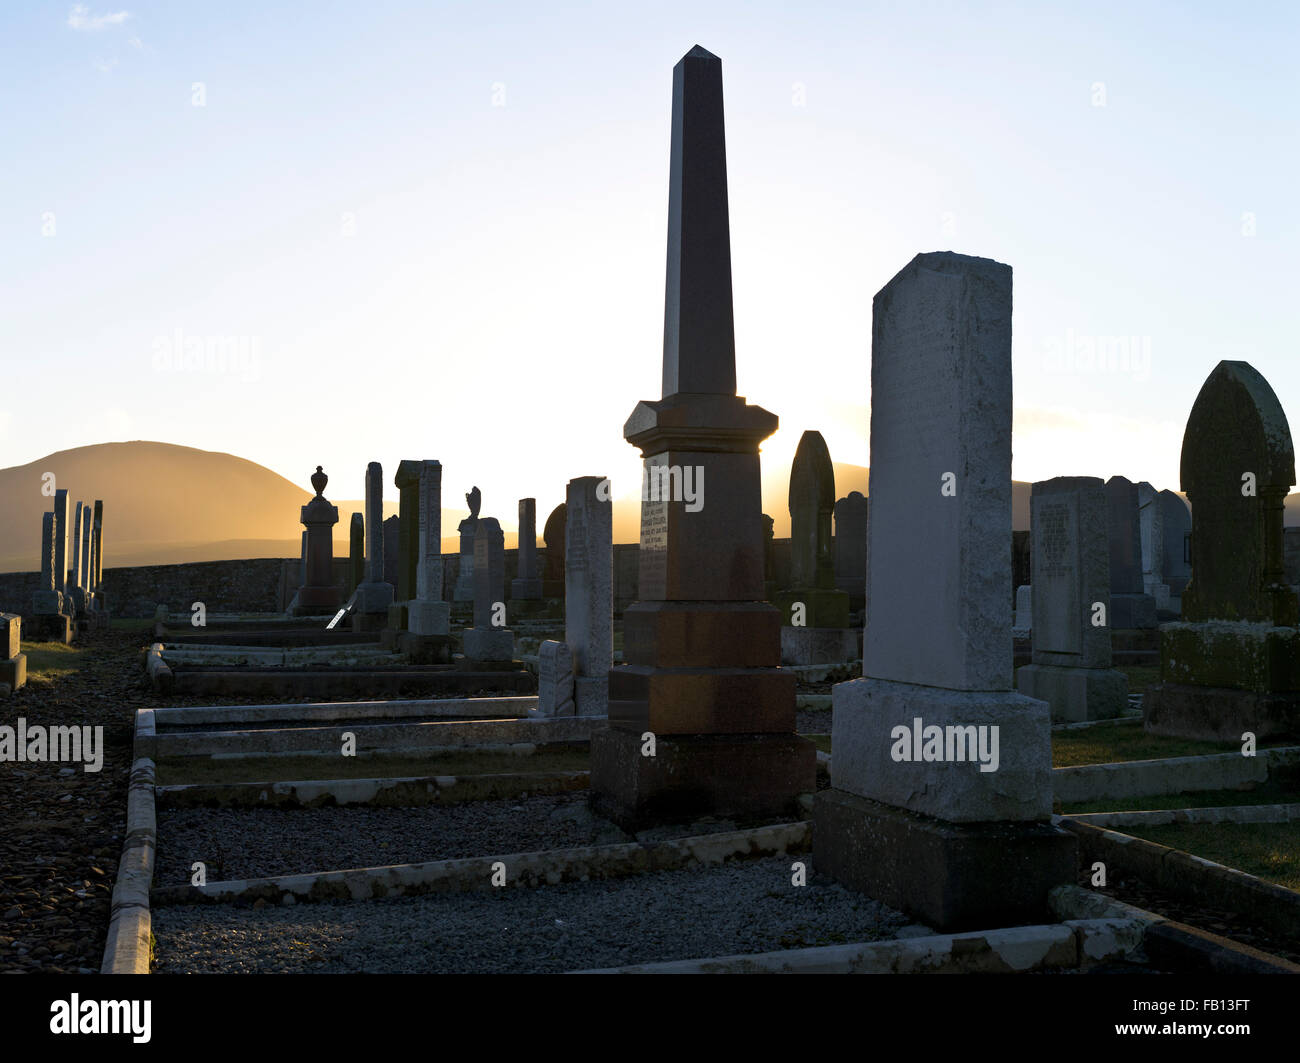 dh Stromness Cemetery WARBETH ORKNEY Grave stone sunset cemetery gravestones gravestone silhouette uk winter Stock Photo